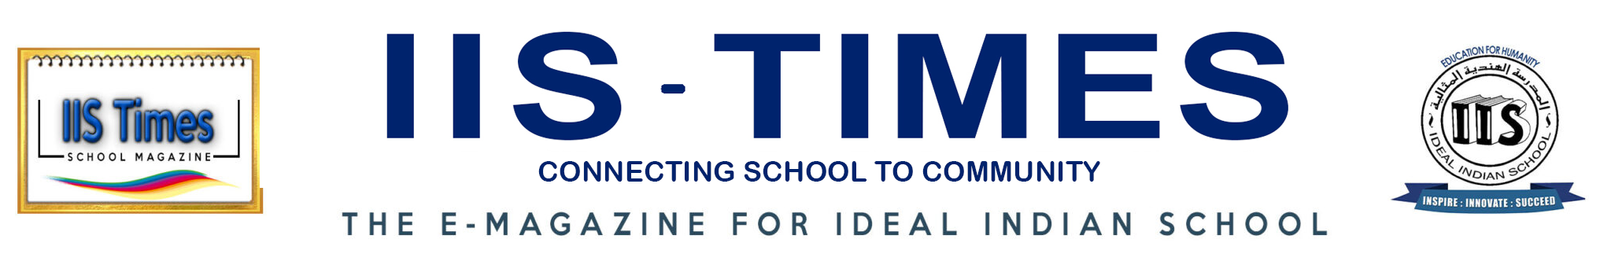 IIS Times Connecting School to Community